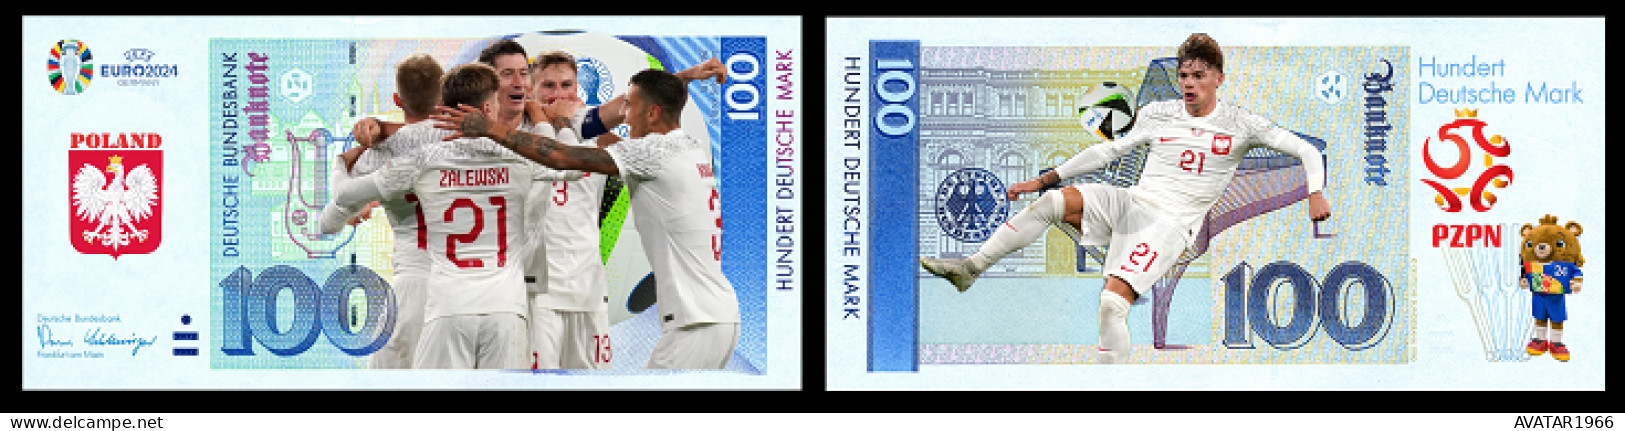 UEFA European Football Championship 2024 qualified country  Poland  8 pieces Germany fantasy paper money